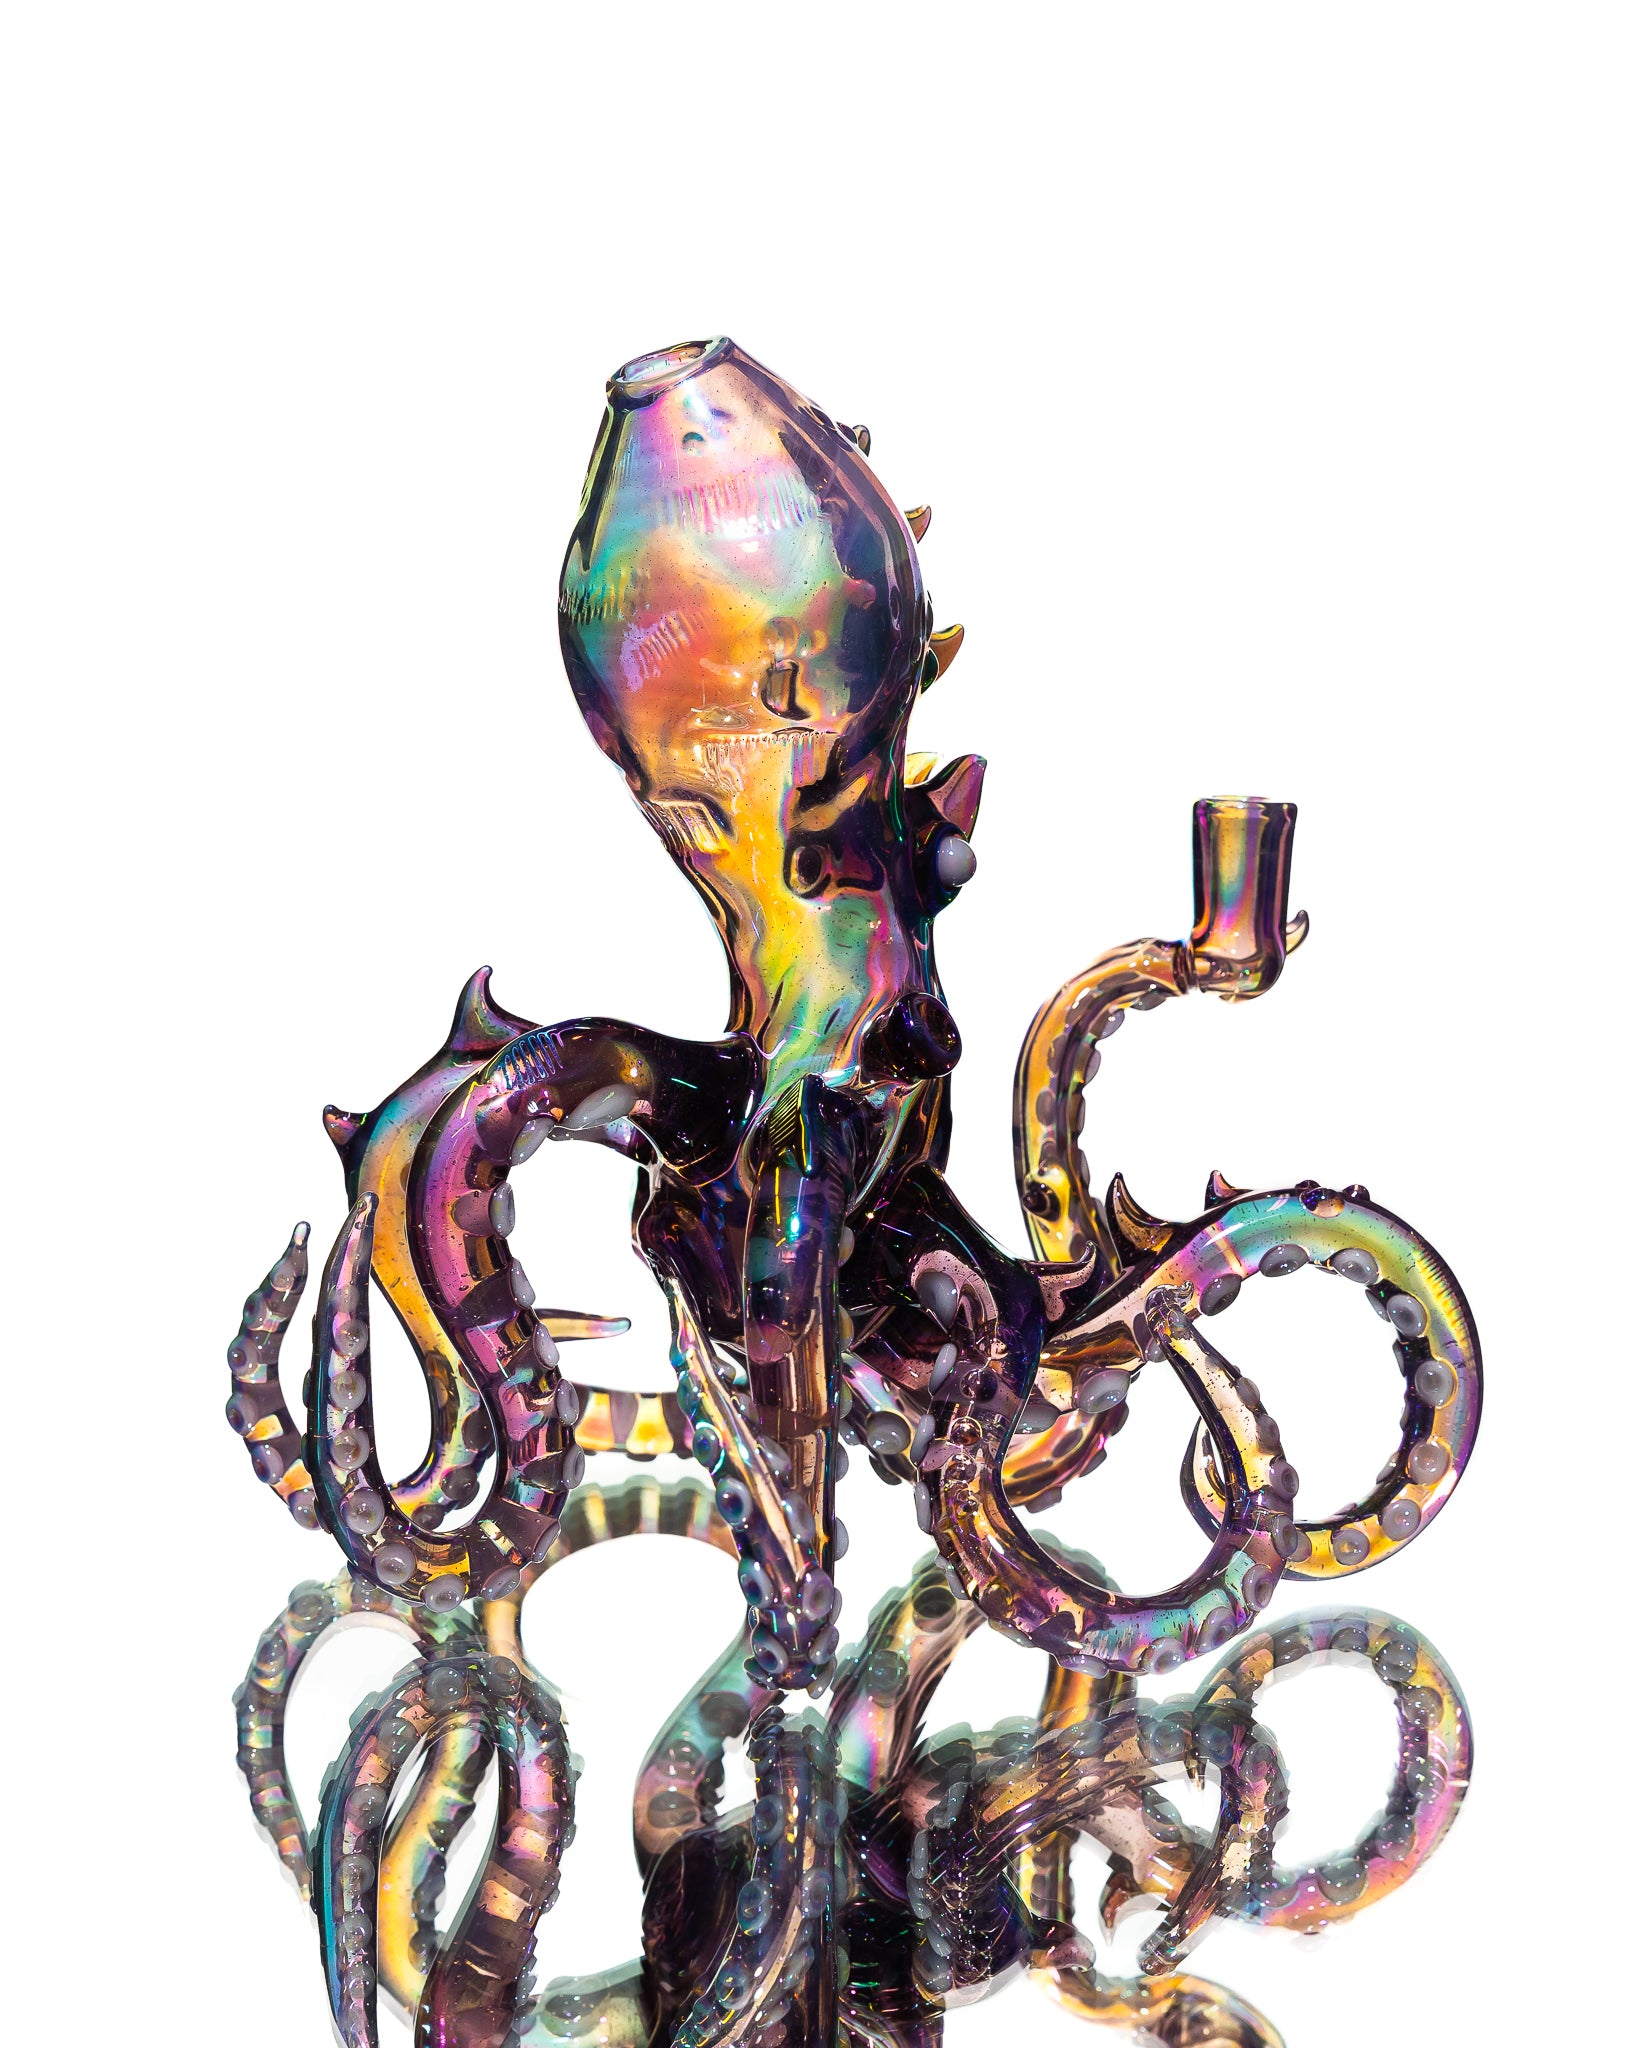 Wicked Glass - "Oil Spill" Octopus Rig